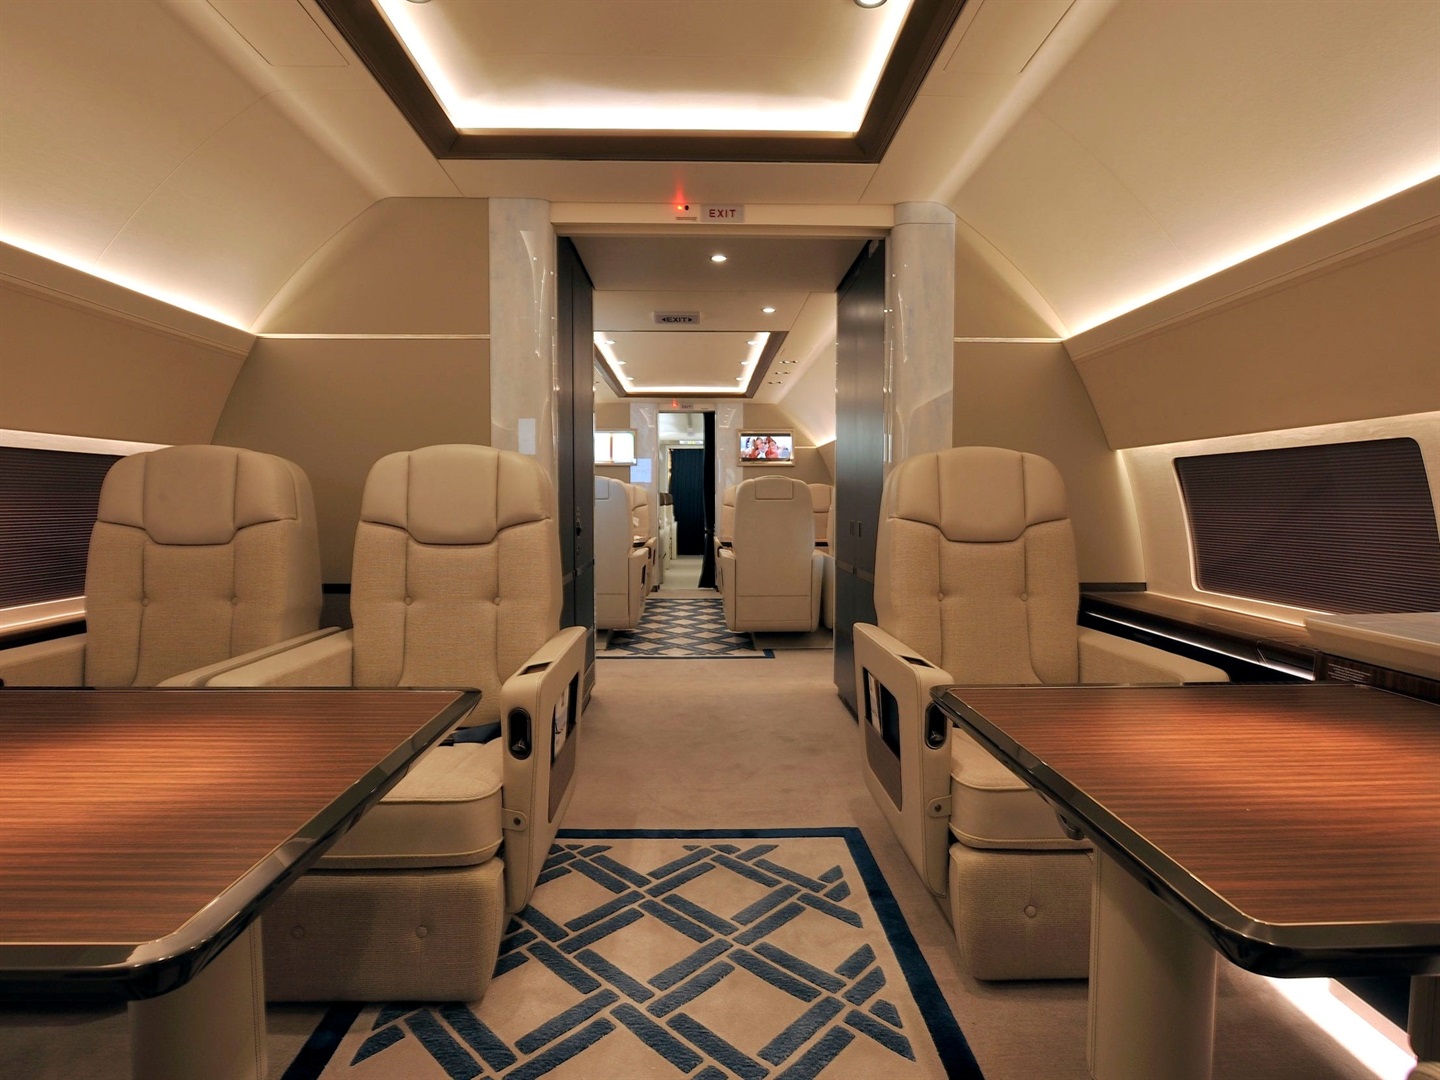 See inside the 'Dutch Air Force One': a Boeing 737 private jet that the